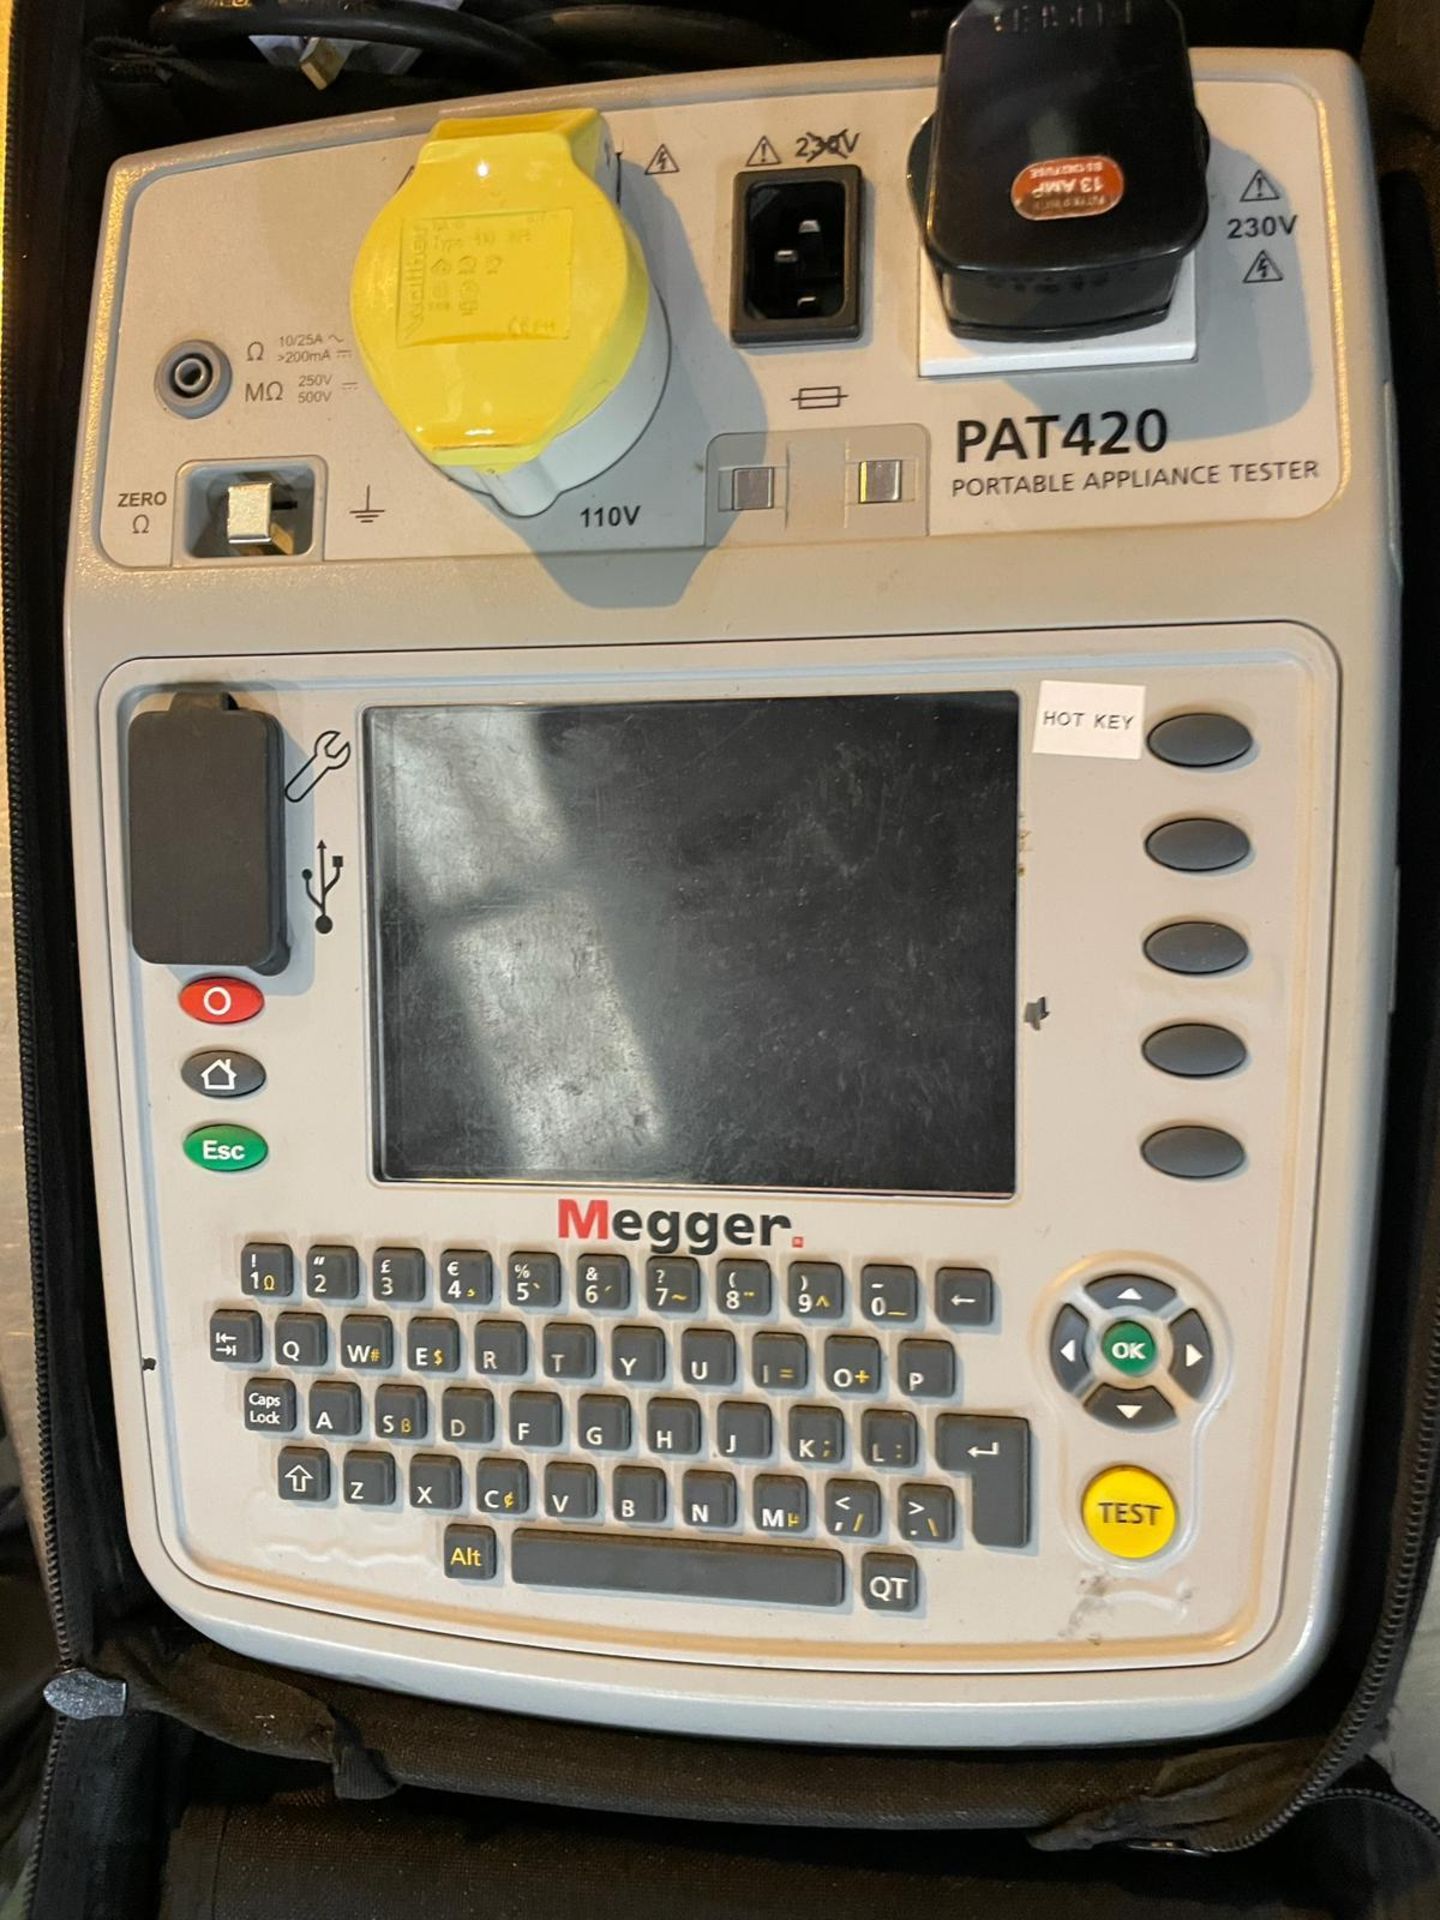 1 x Megger PAT420 Portable Appliance Tester - Includes Case and Accessories - Image 4 of 7